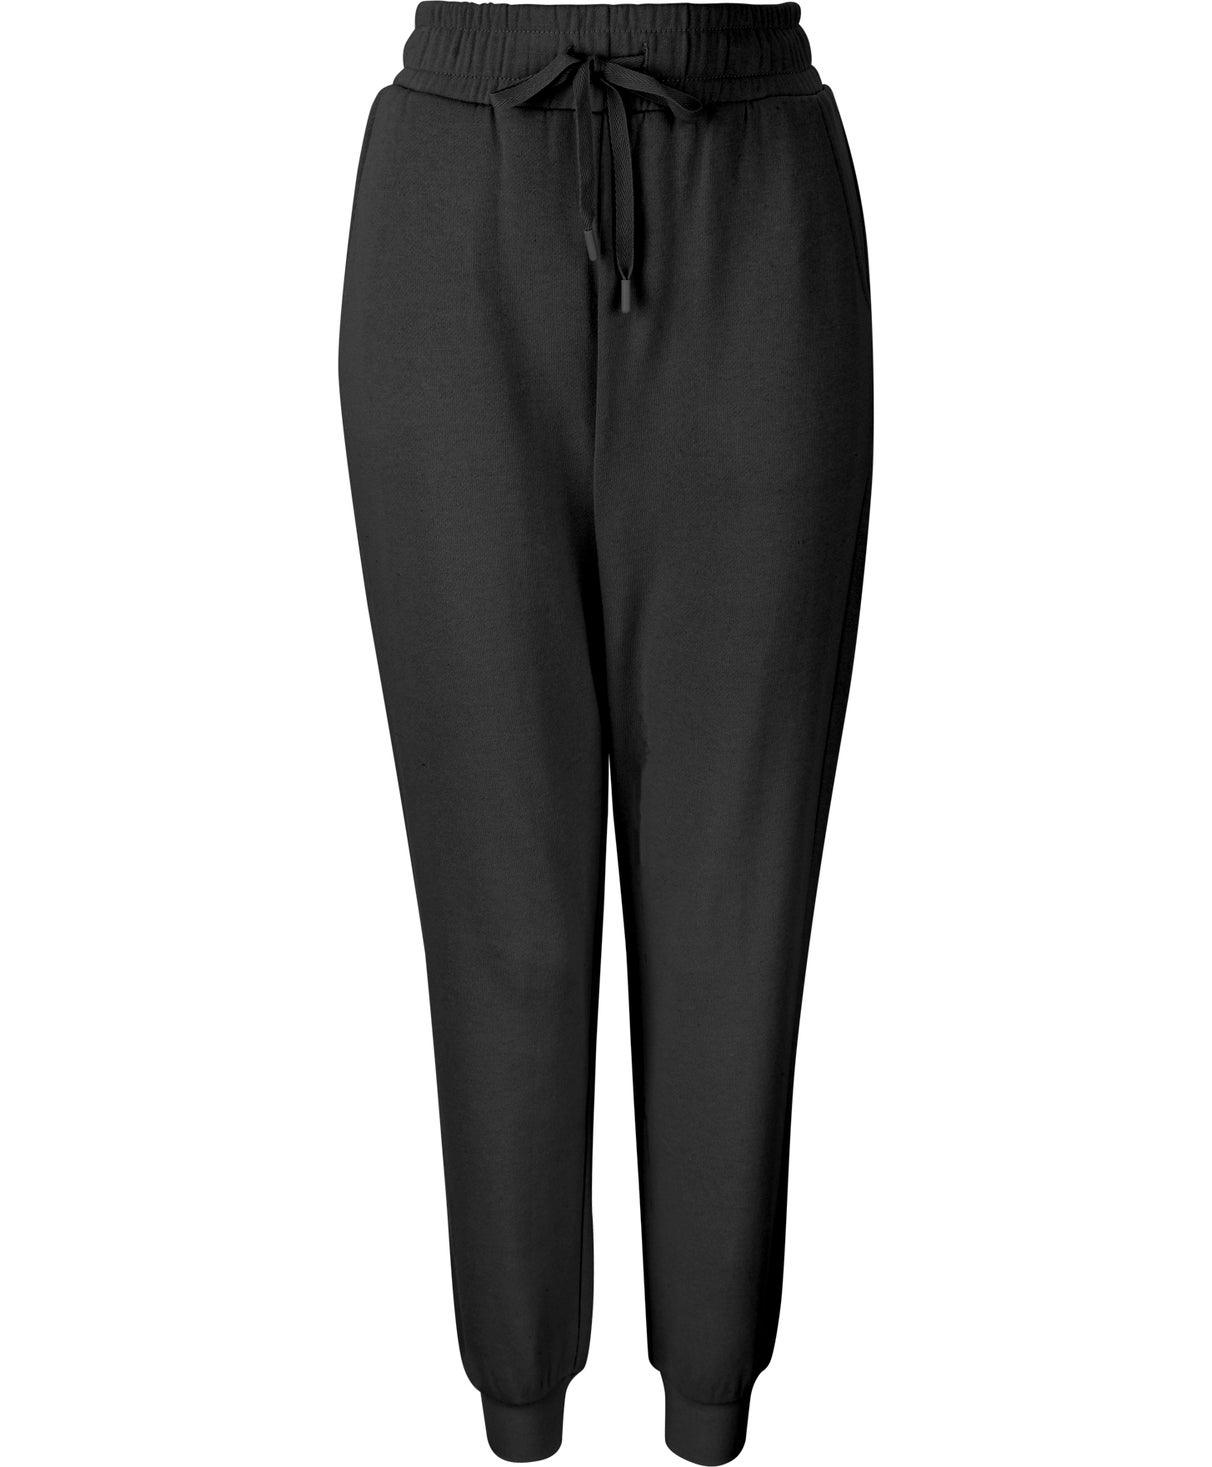 Women's Classic Trackpants in Black